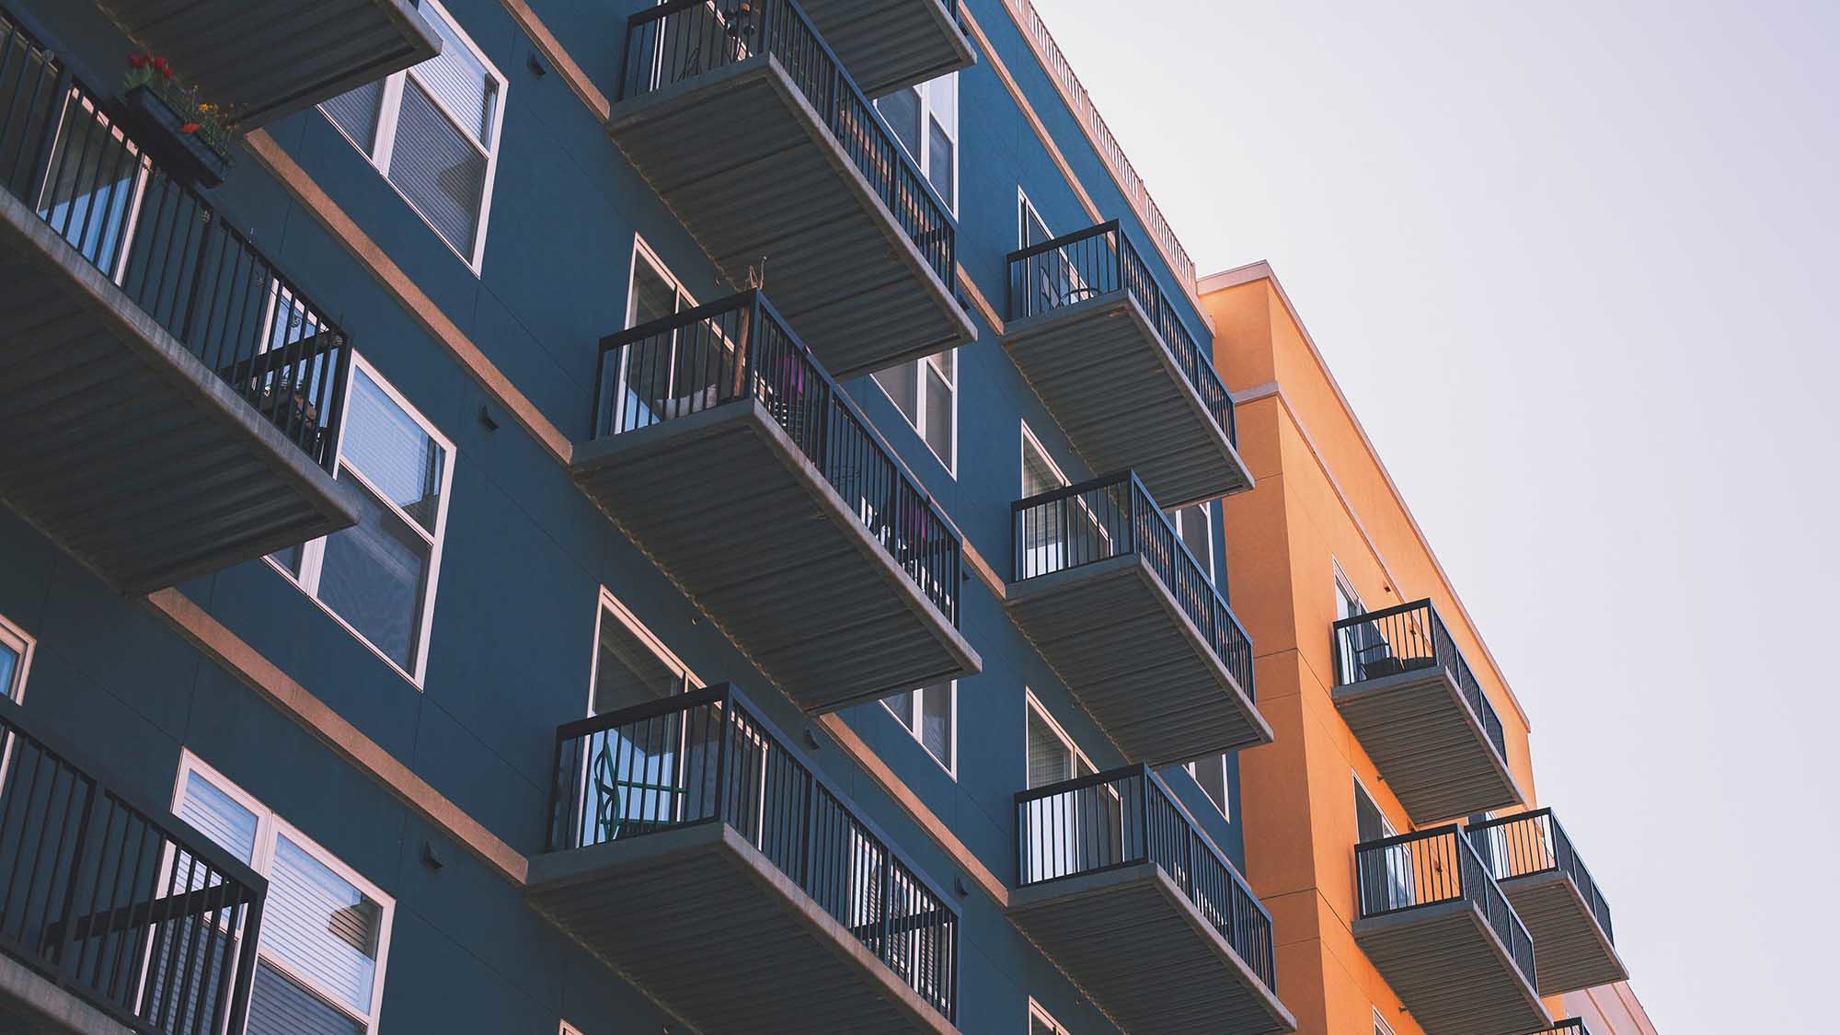 Balconies on a residential building